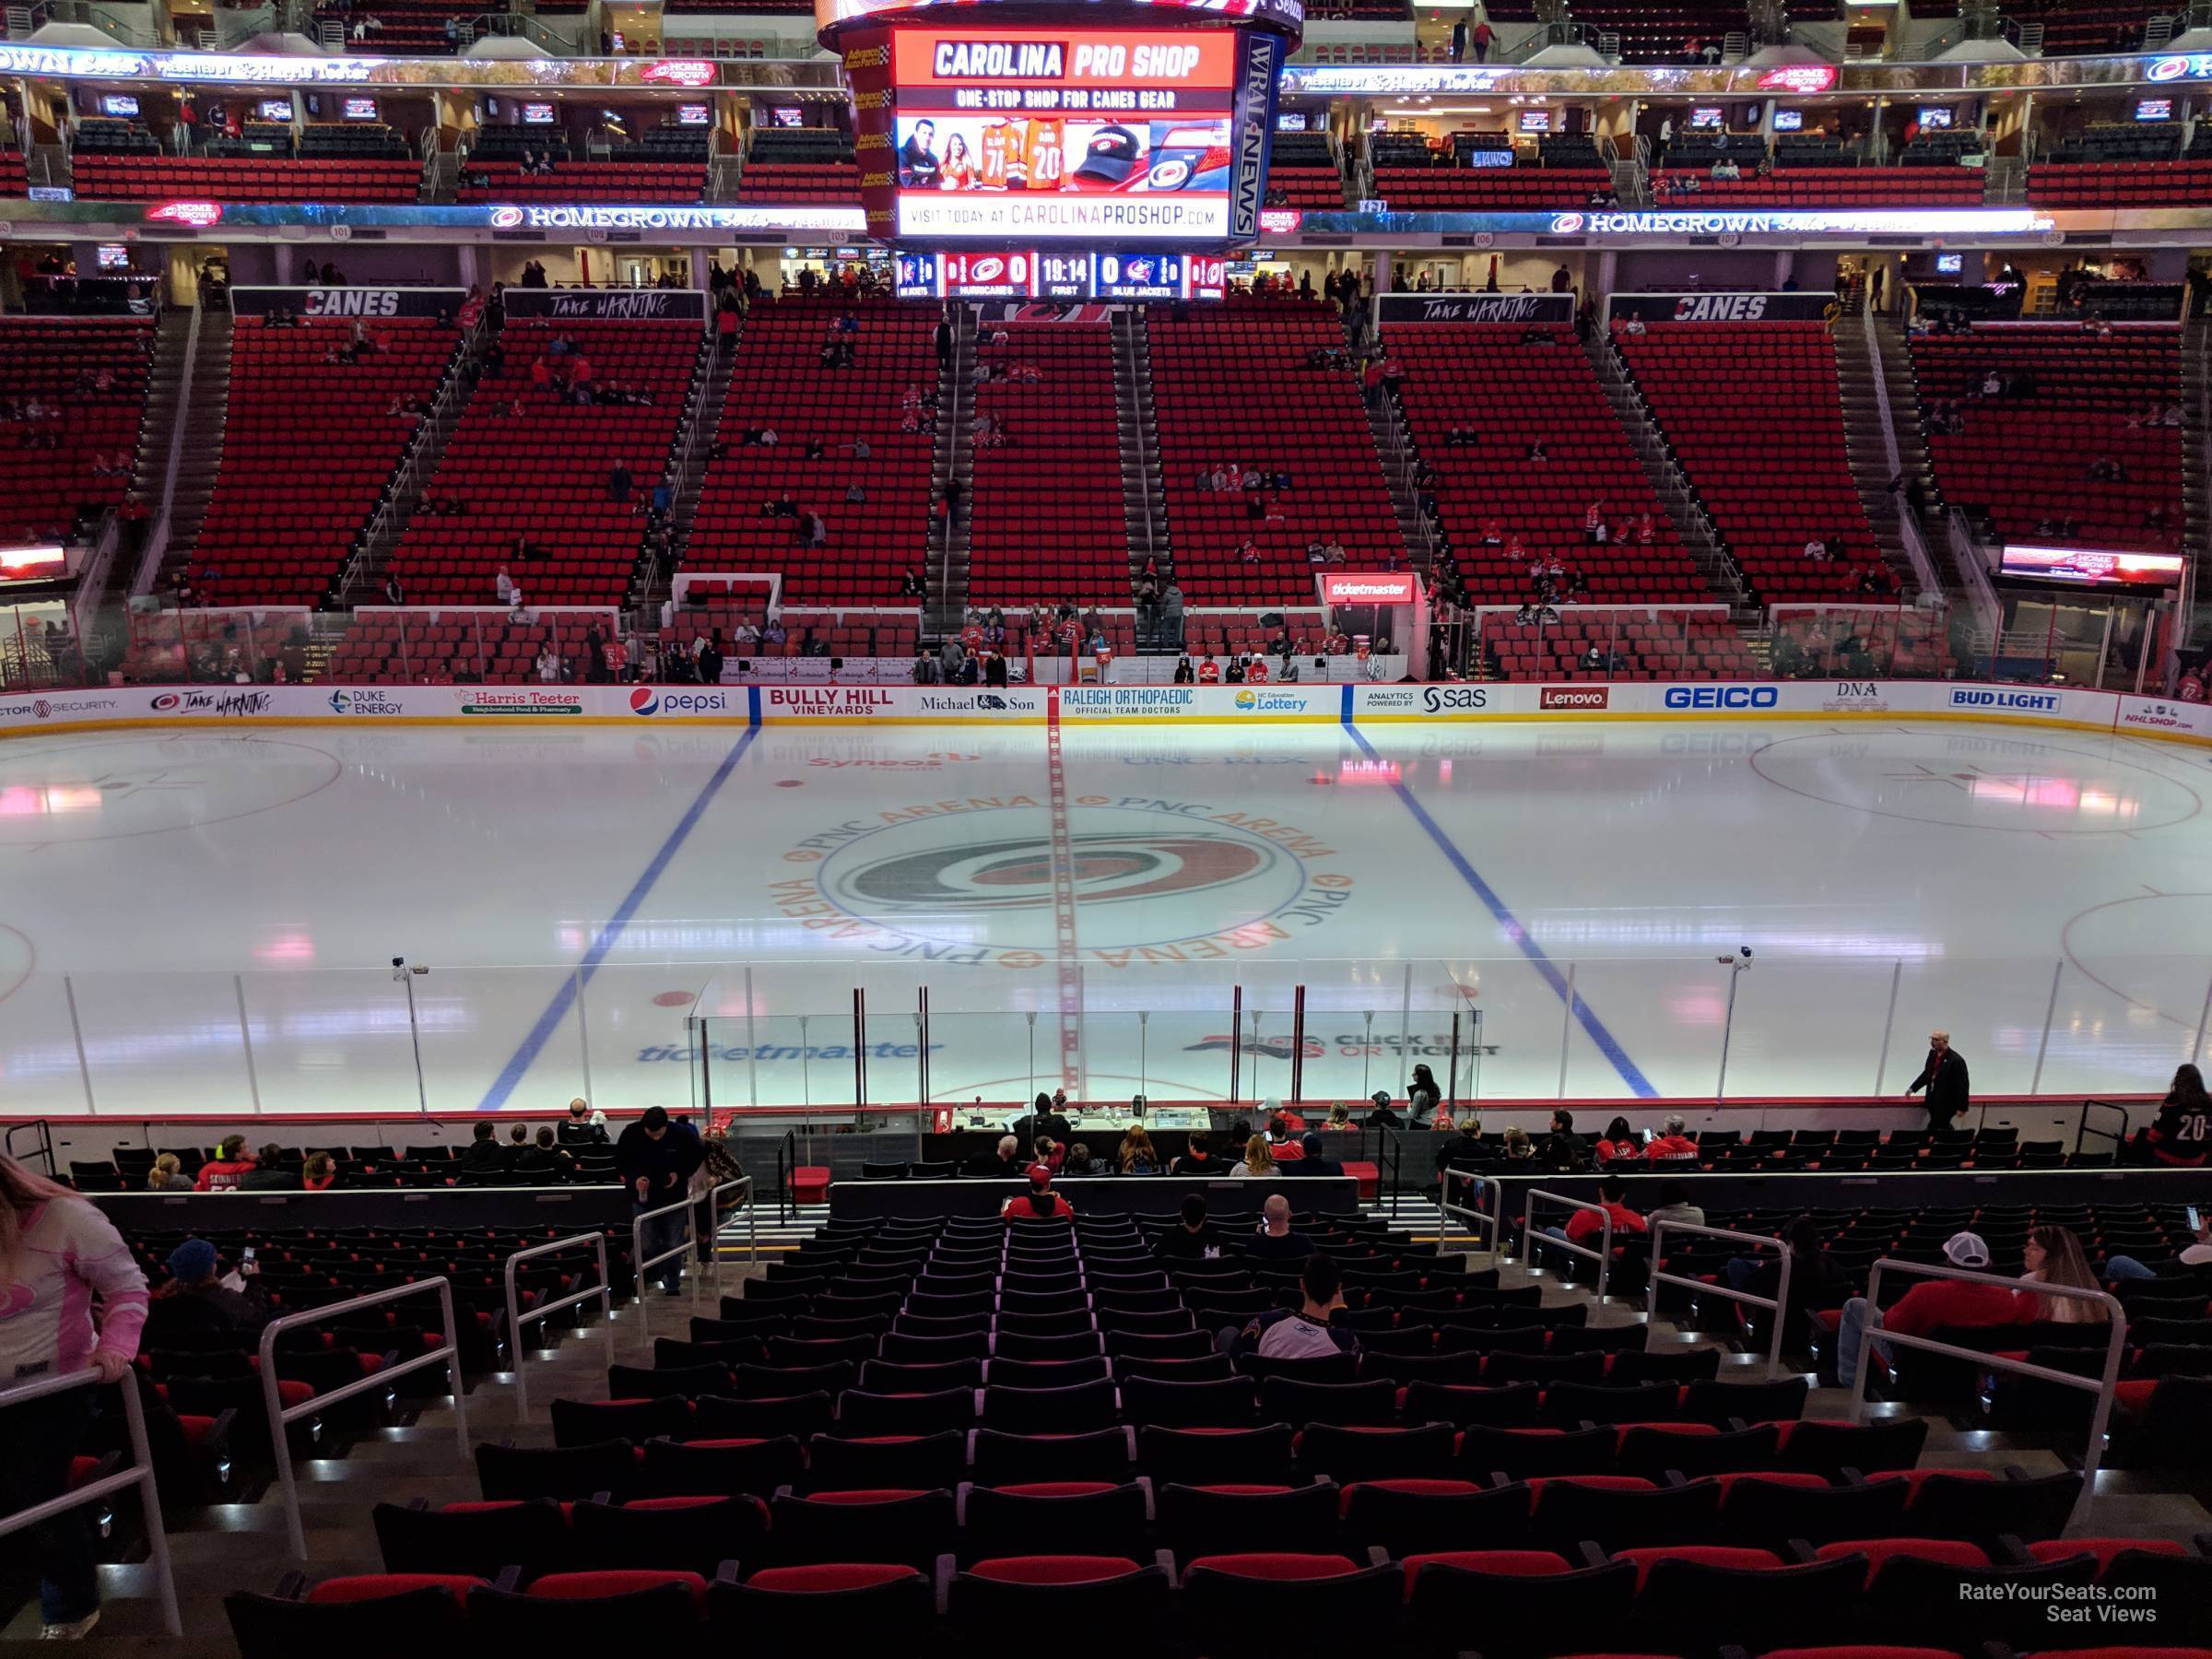 section 119, row w seat view  for hockey - pnc arena